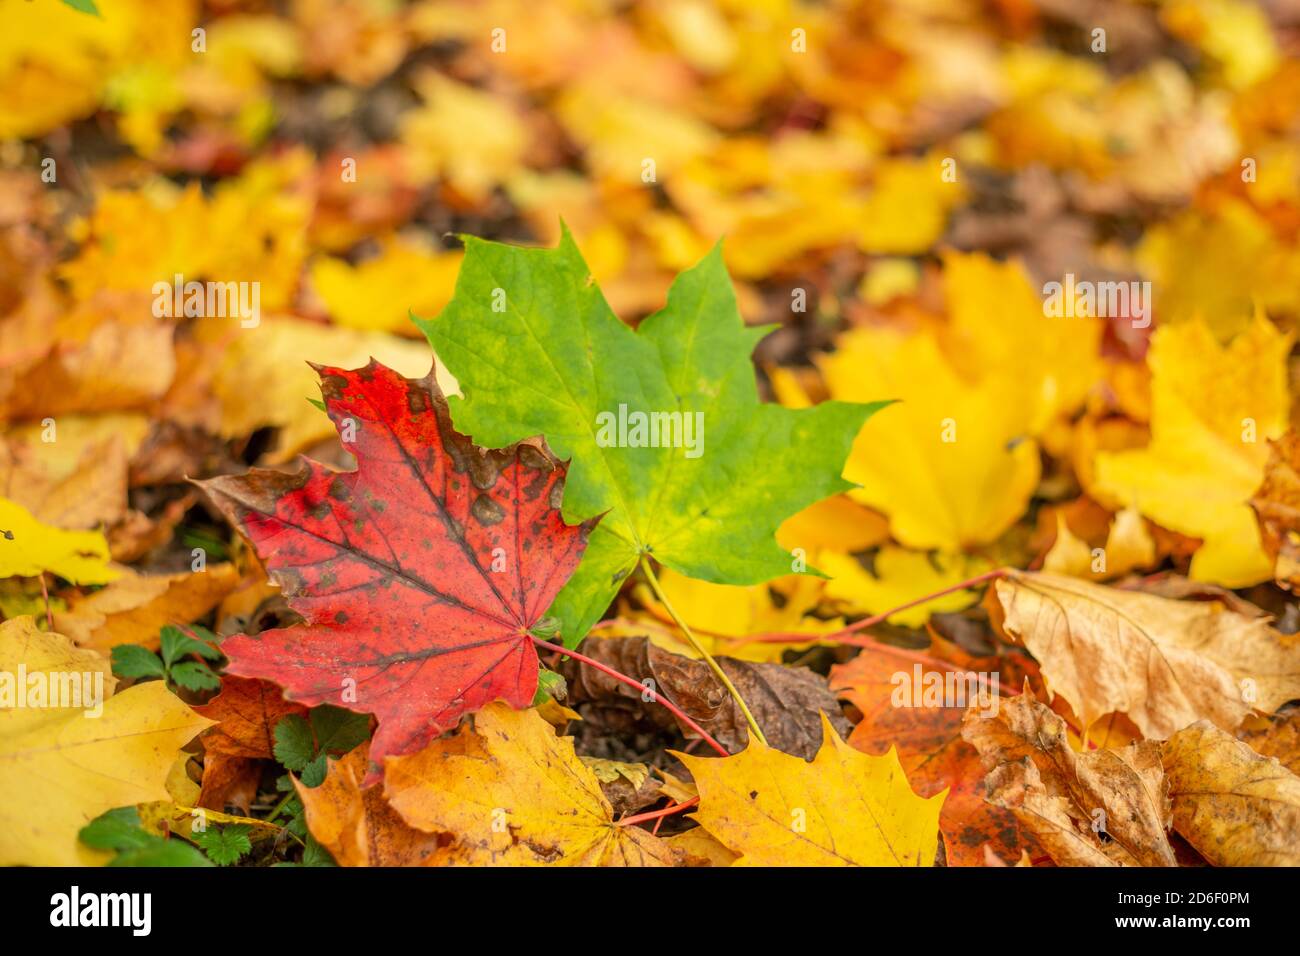 Red and green leaf in amongst yellow and orange leaves on forest floor, autumn or fall, seasons changing, lifecycle, plants, trees. England UK Stock Photo